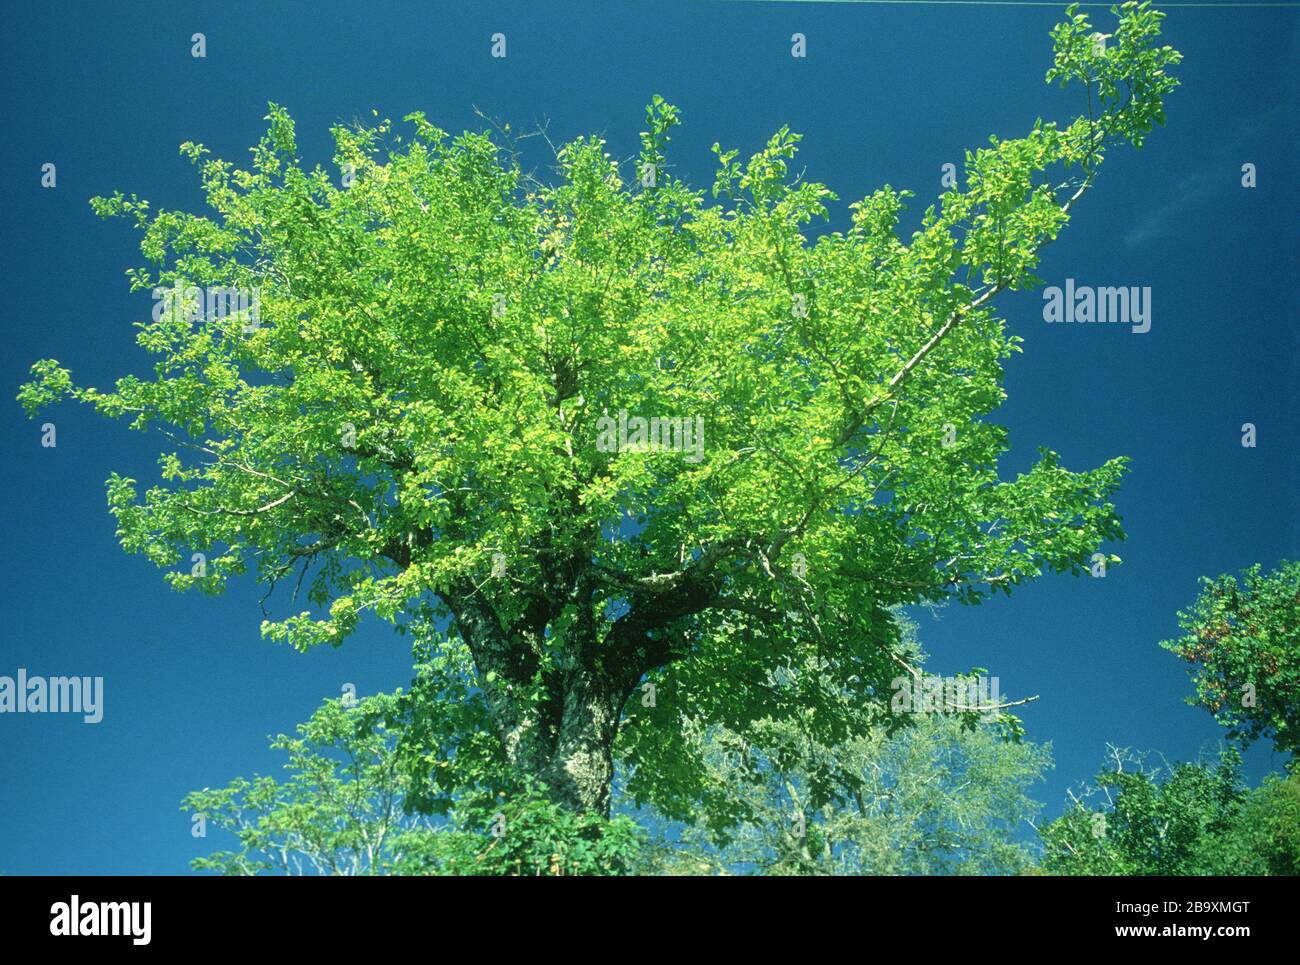 Fluorescent green leaves of a tree, set against a deep blue sky, in Lia (Lias), Epirus, Greece Stock Photo